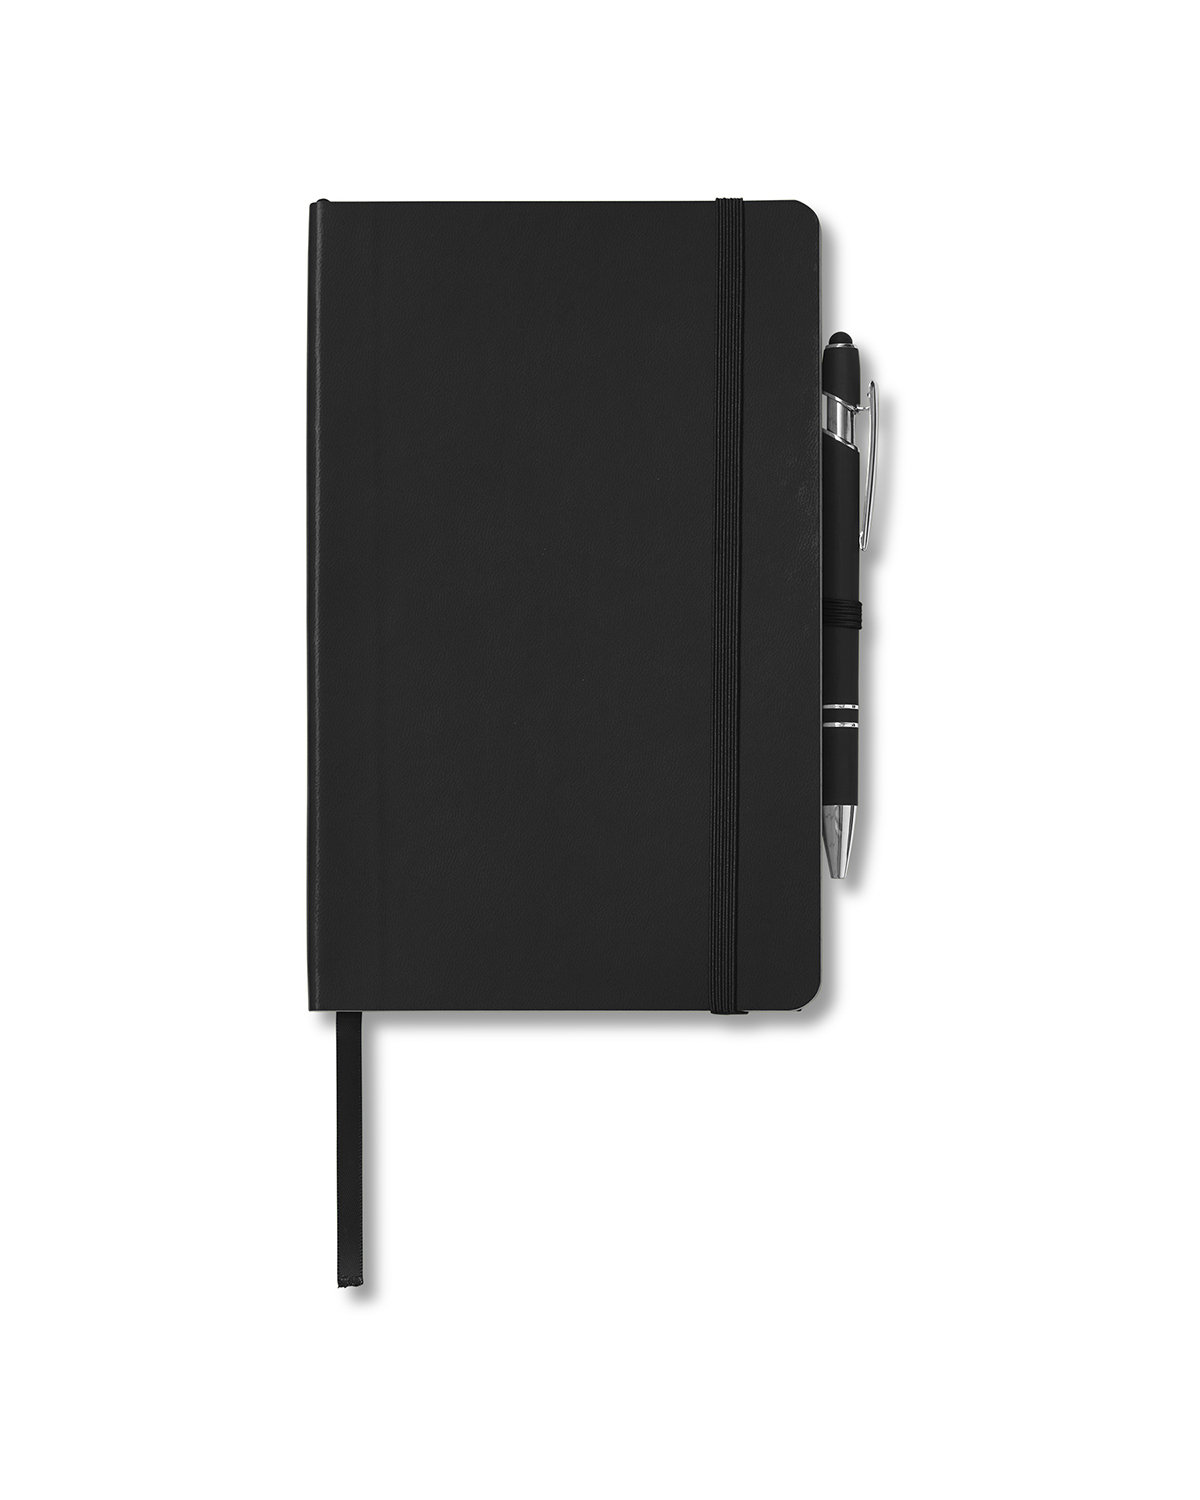 CORE365 Soft Cover Journal And Pen Set black 